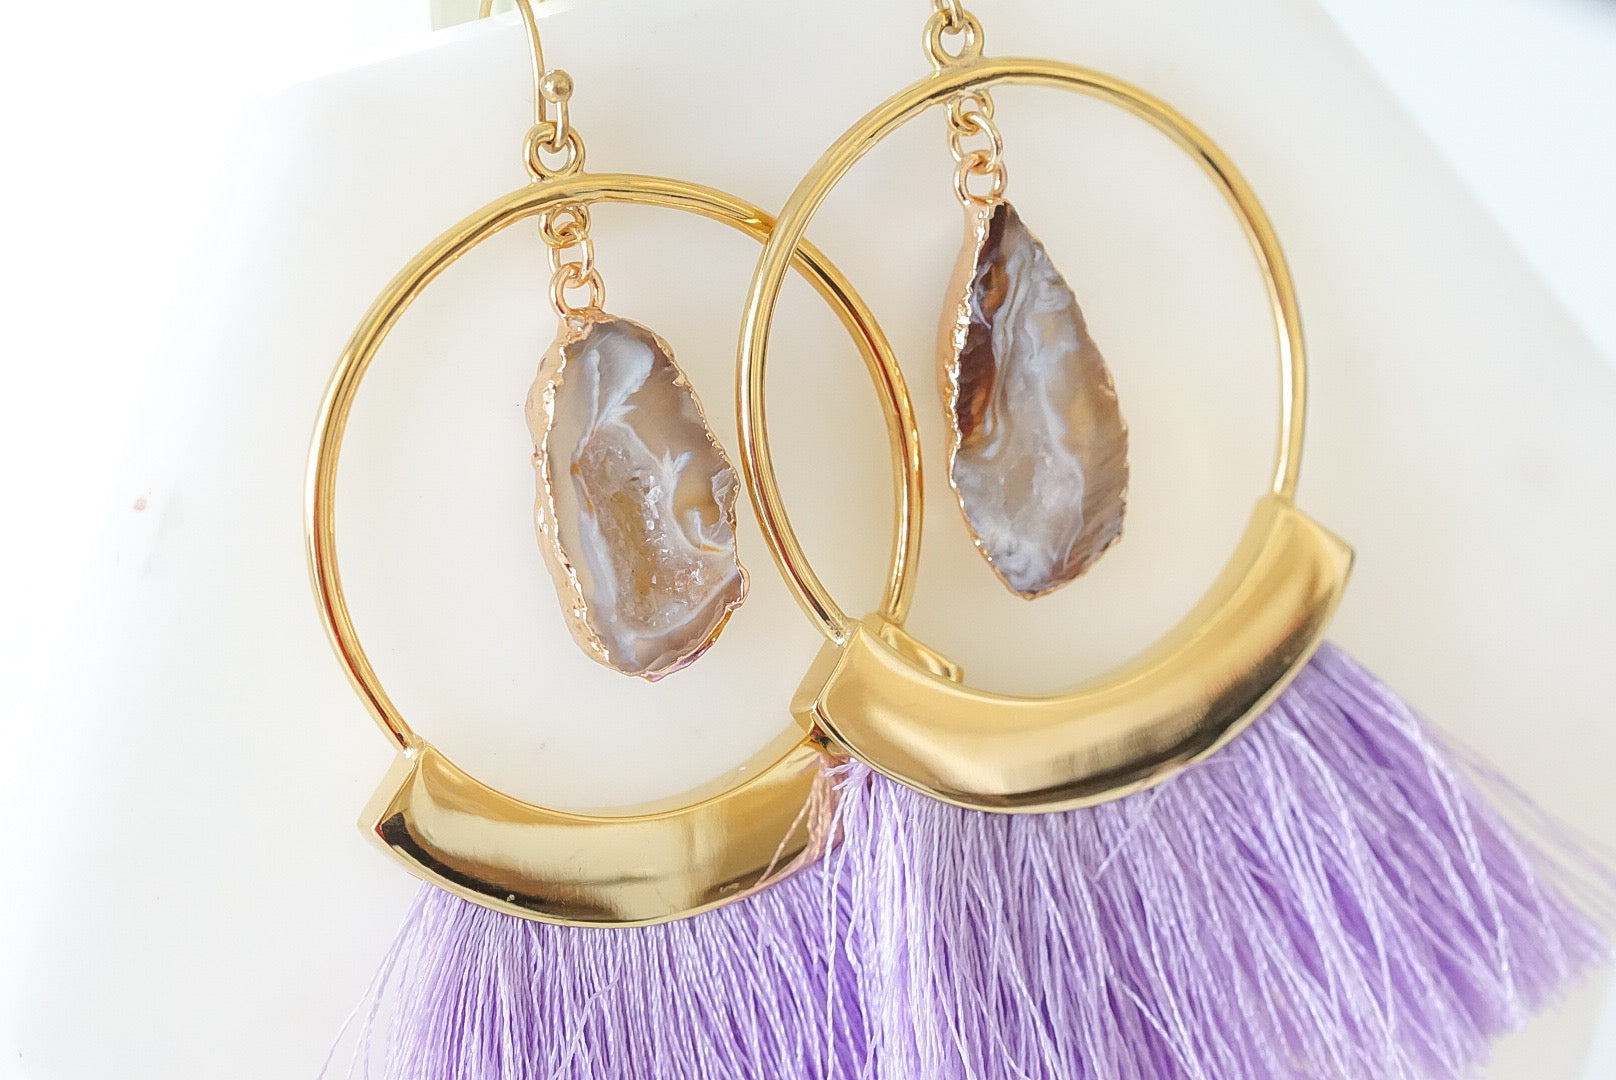 Agate Collection - Royal Fringe Earrings fine designer jewelry for men and women